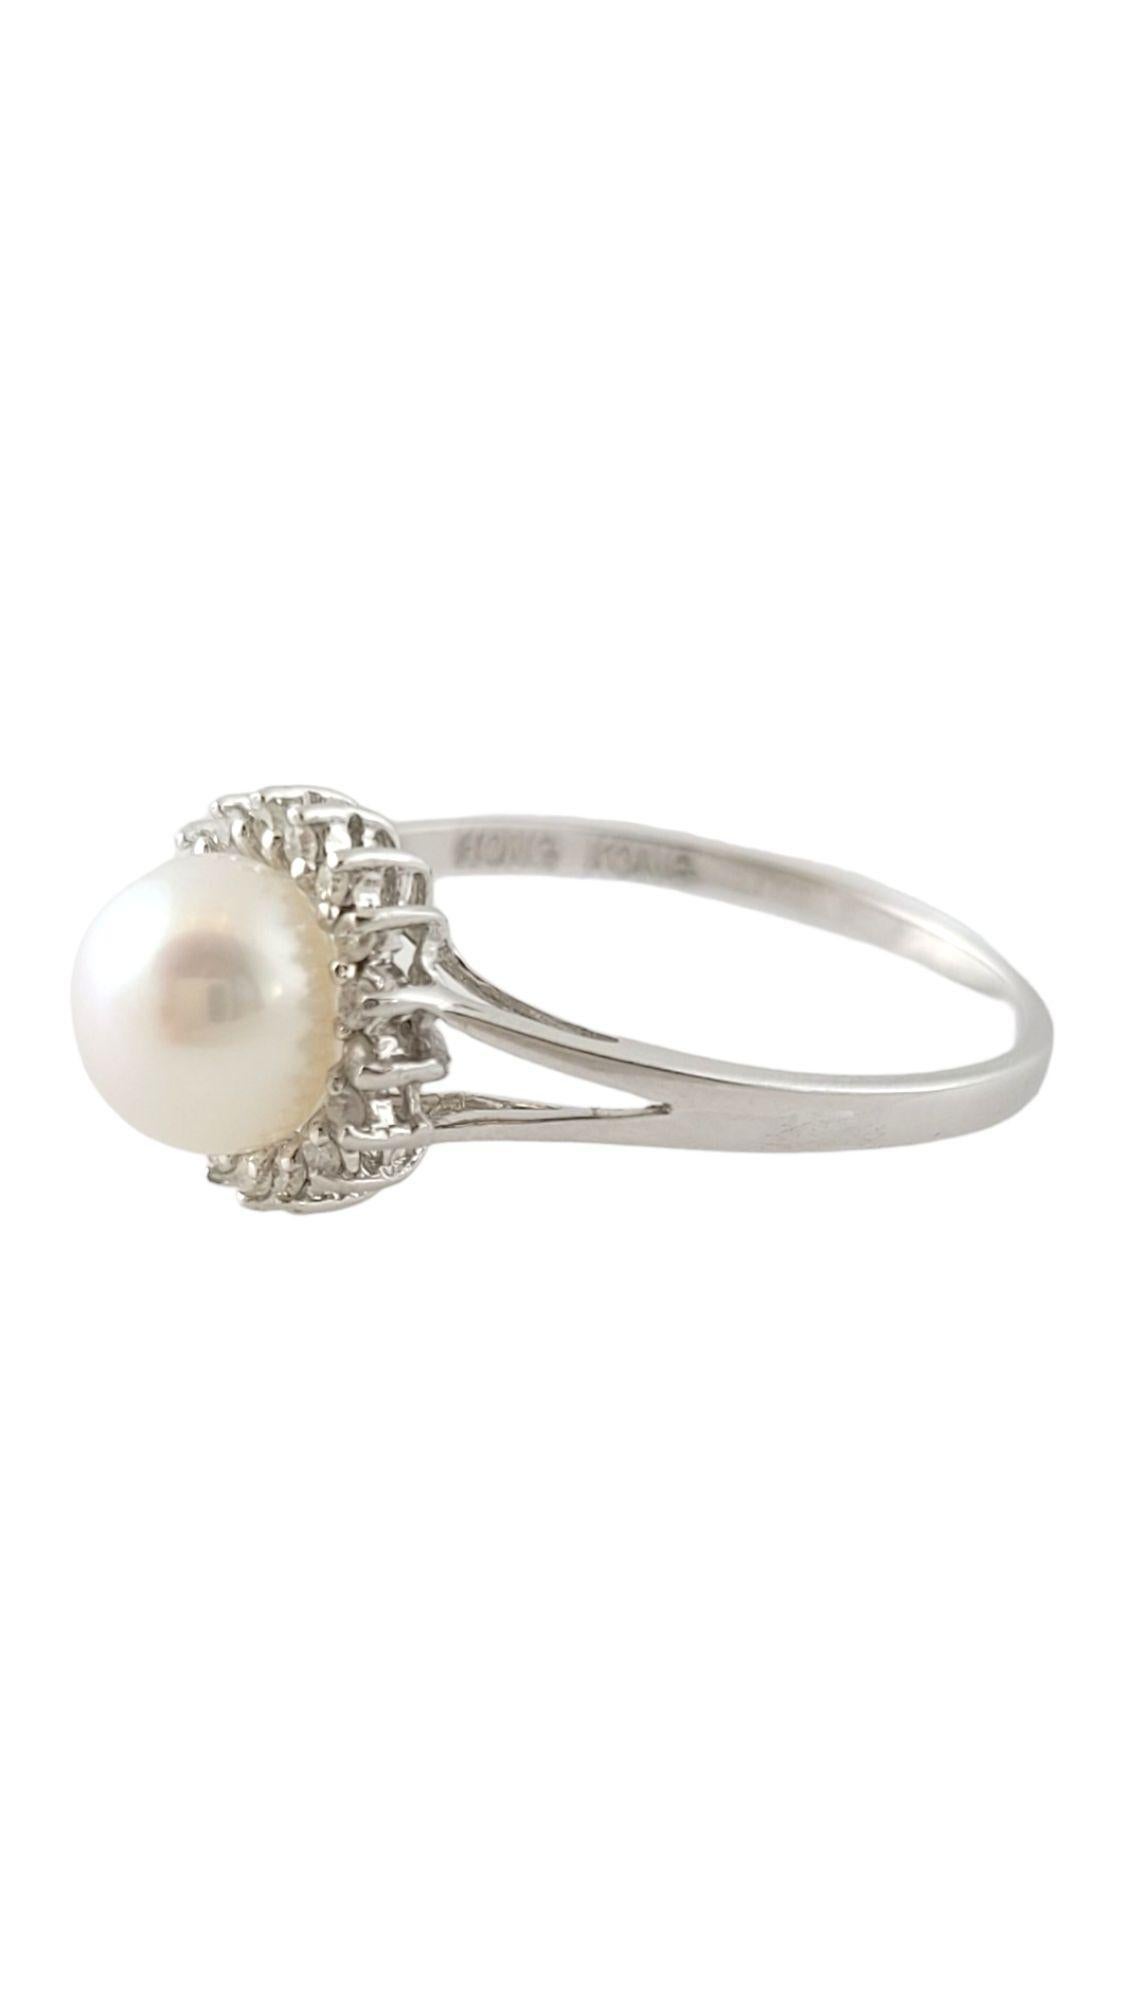 Vintage 14 Karat White Gold Pearl and Diamond Ring Size 9.25-

This elegant ring features one round white pearl (7 mm) and 18 round single cut diamonds set in classic 14K white gold. Shank: 1.5 mm. 
Width: 10 mm.

Approximate total diamond